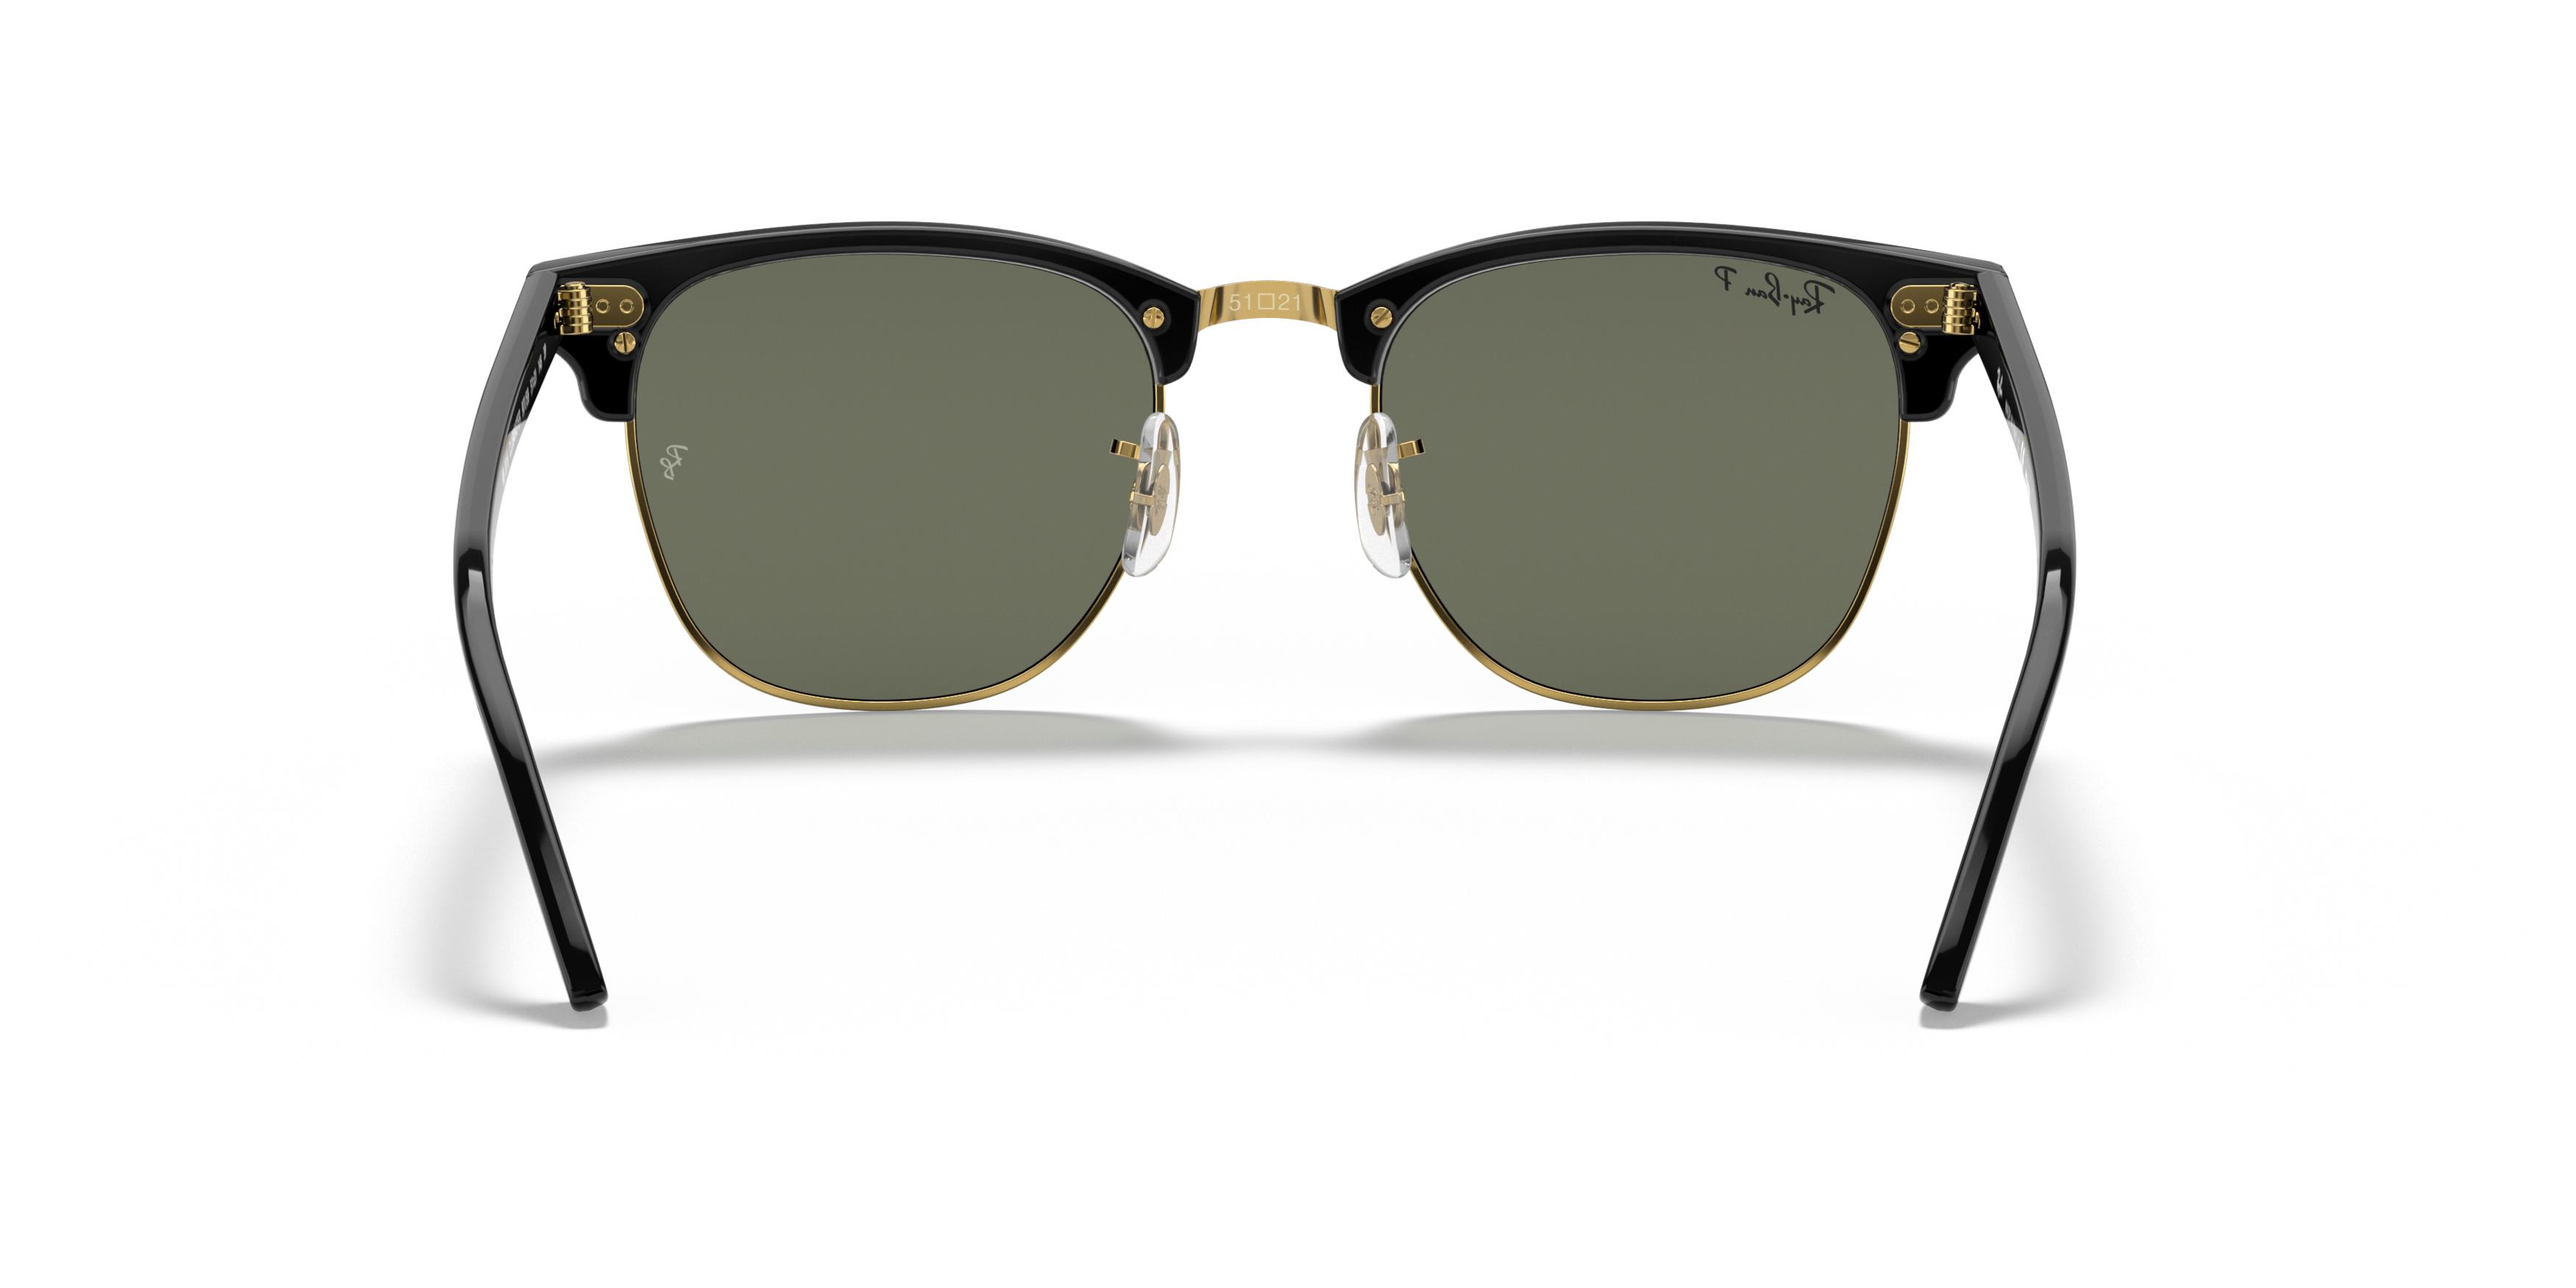 Detail02 Ray-Ban RB 3016 (901/58) Sunglasses Green / Gold